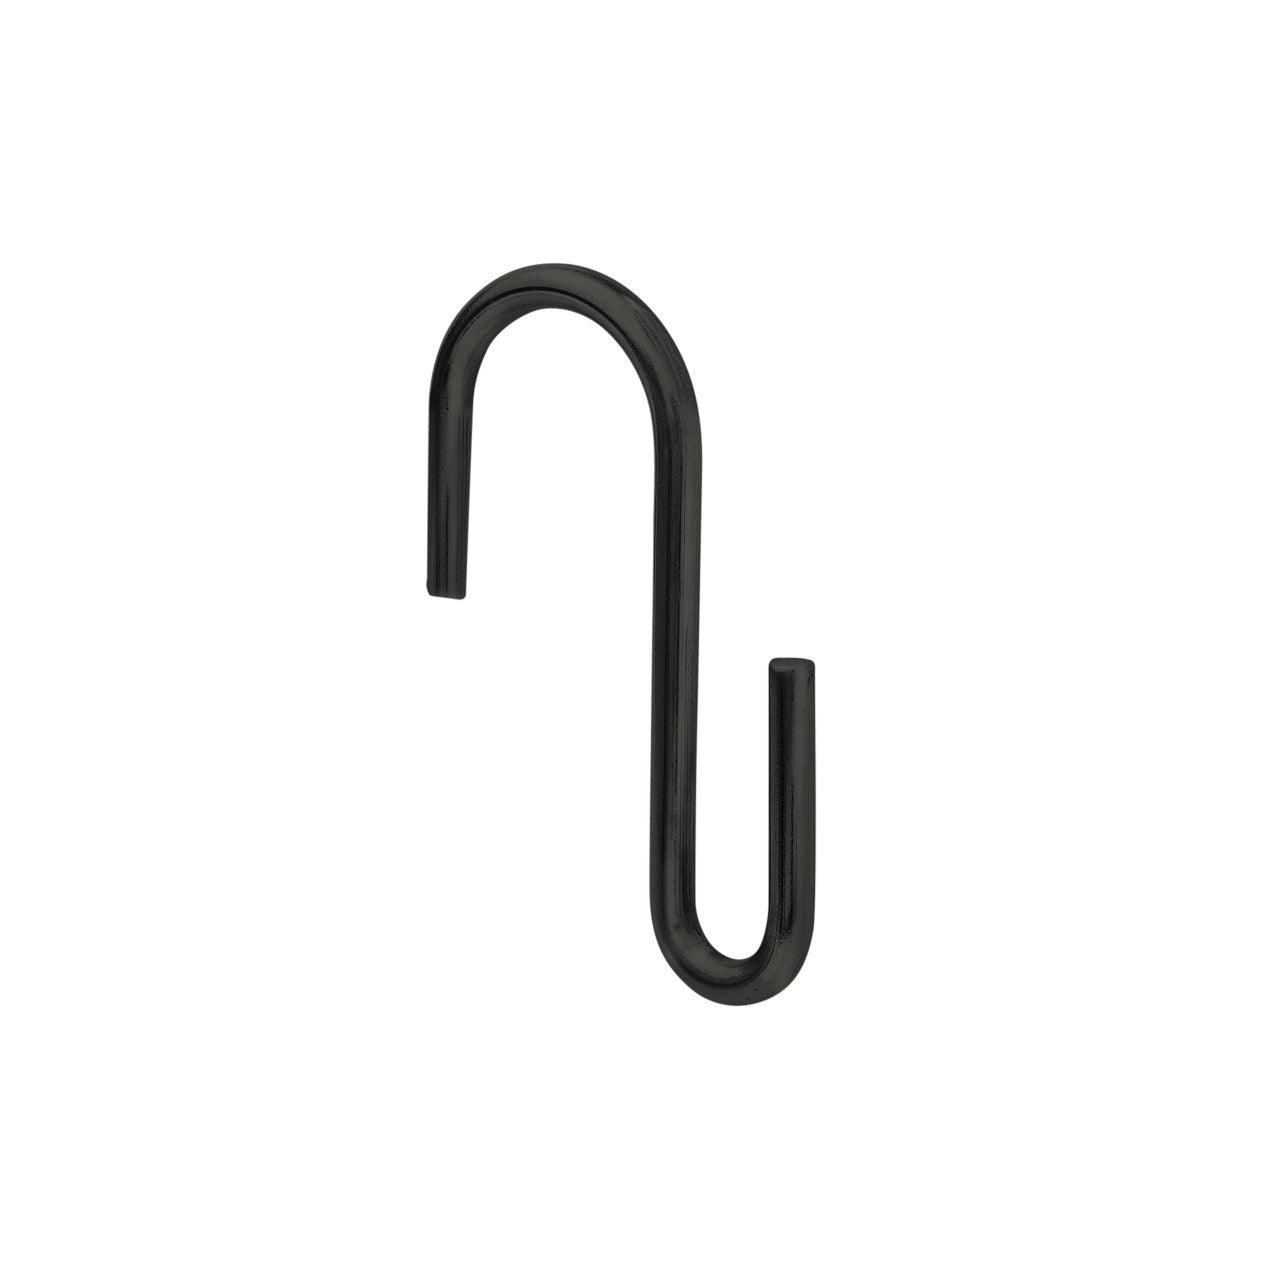 Hooks & Clips: Small S Hook Thick Style in Chrome - Per 100